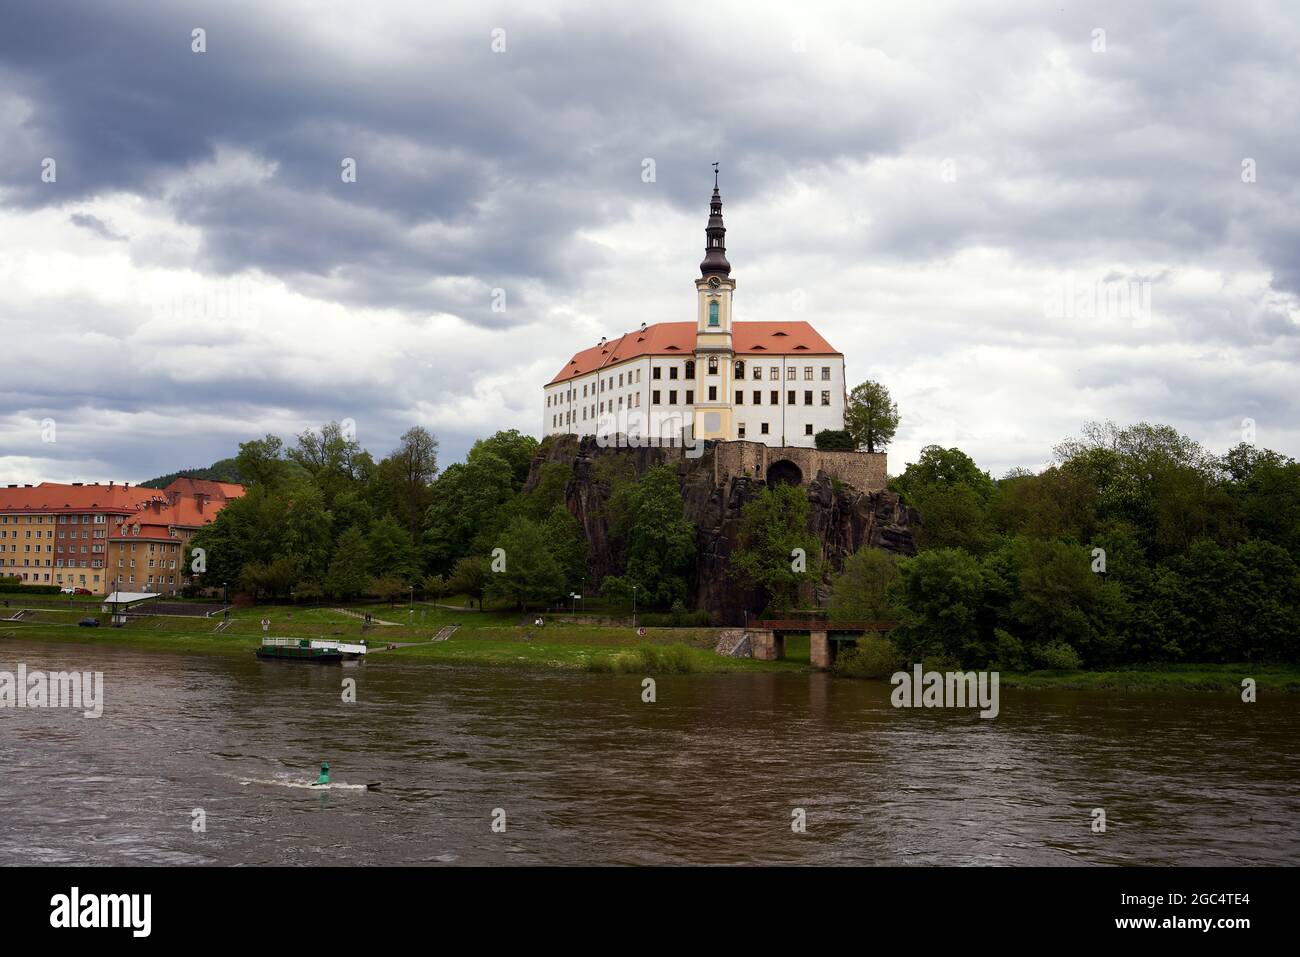 DECIN, CZECH REPUBLIC - MAY 22, 2021: View of the castle and the Elbe river Stock Photo